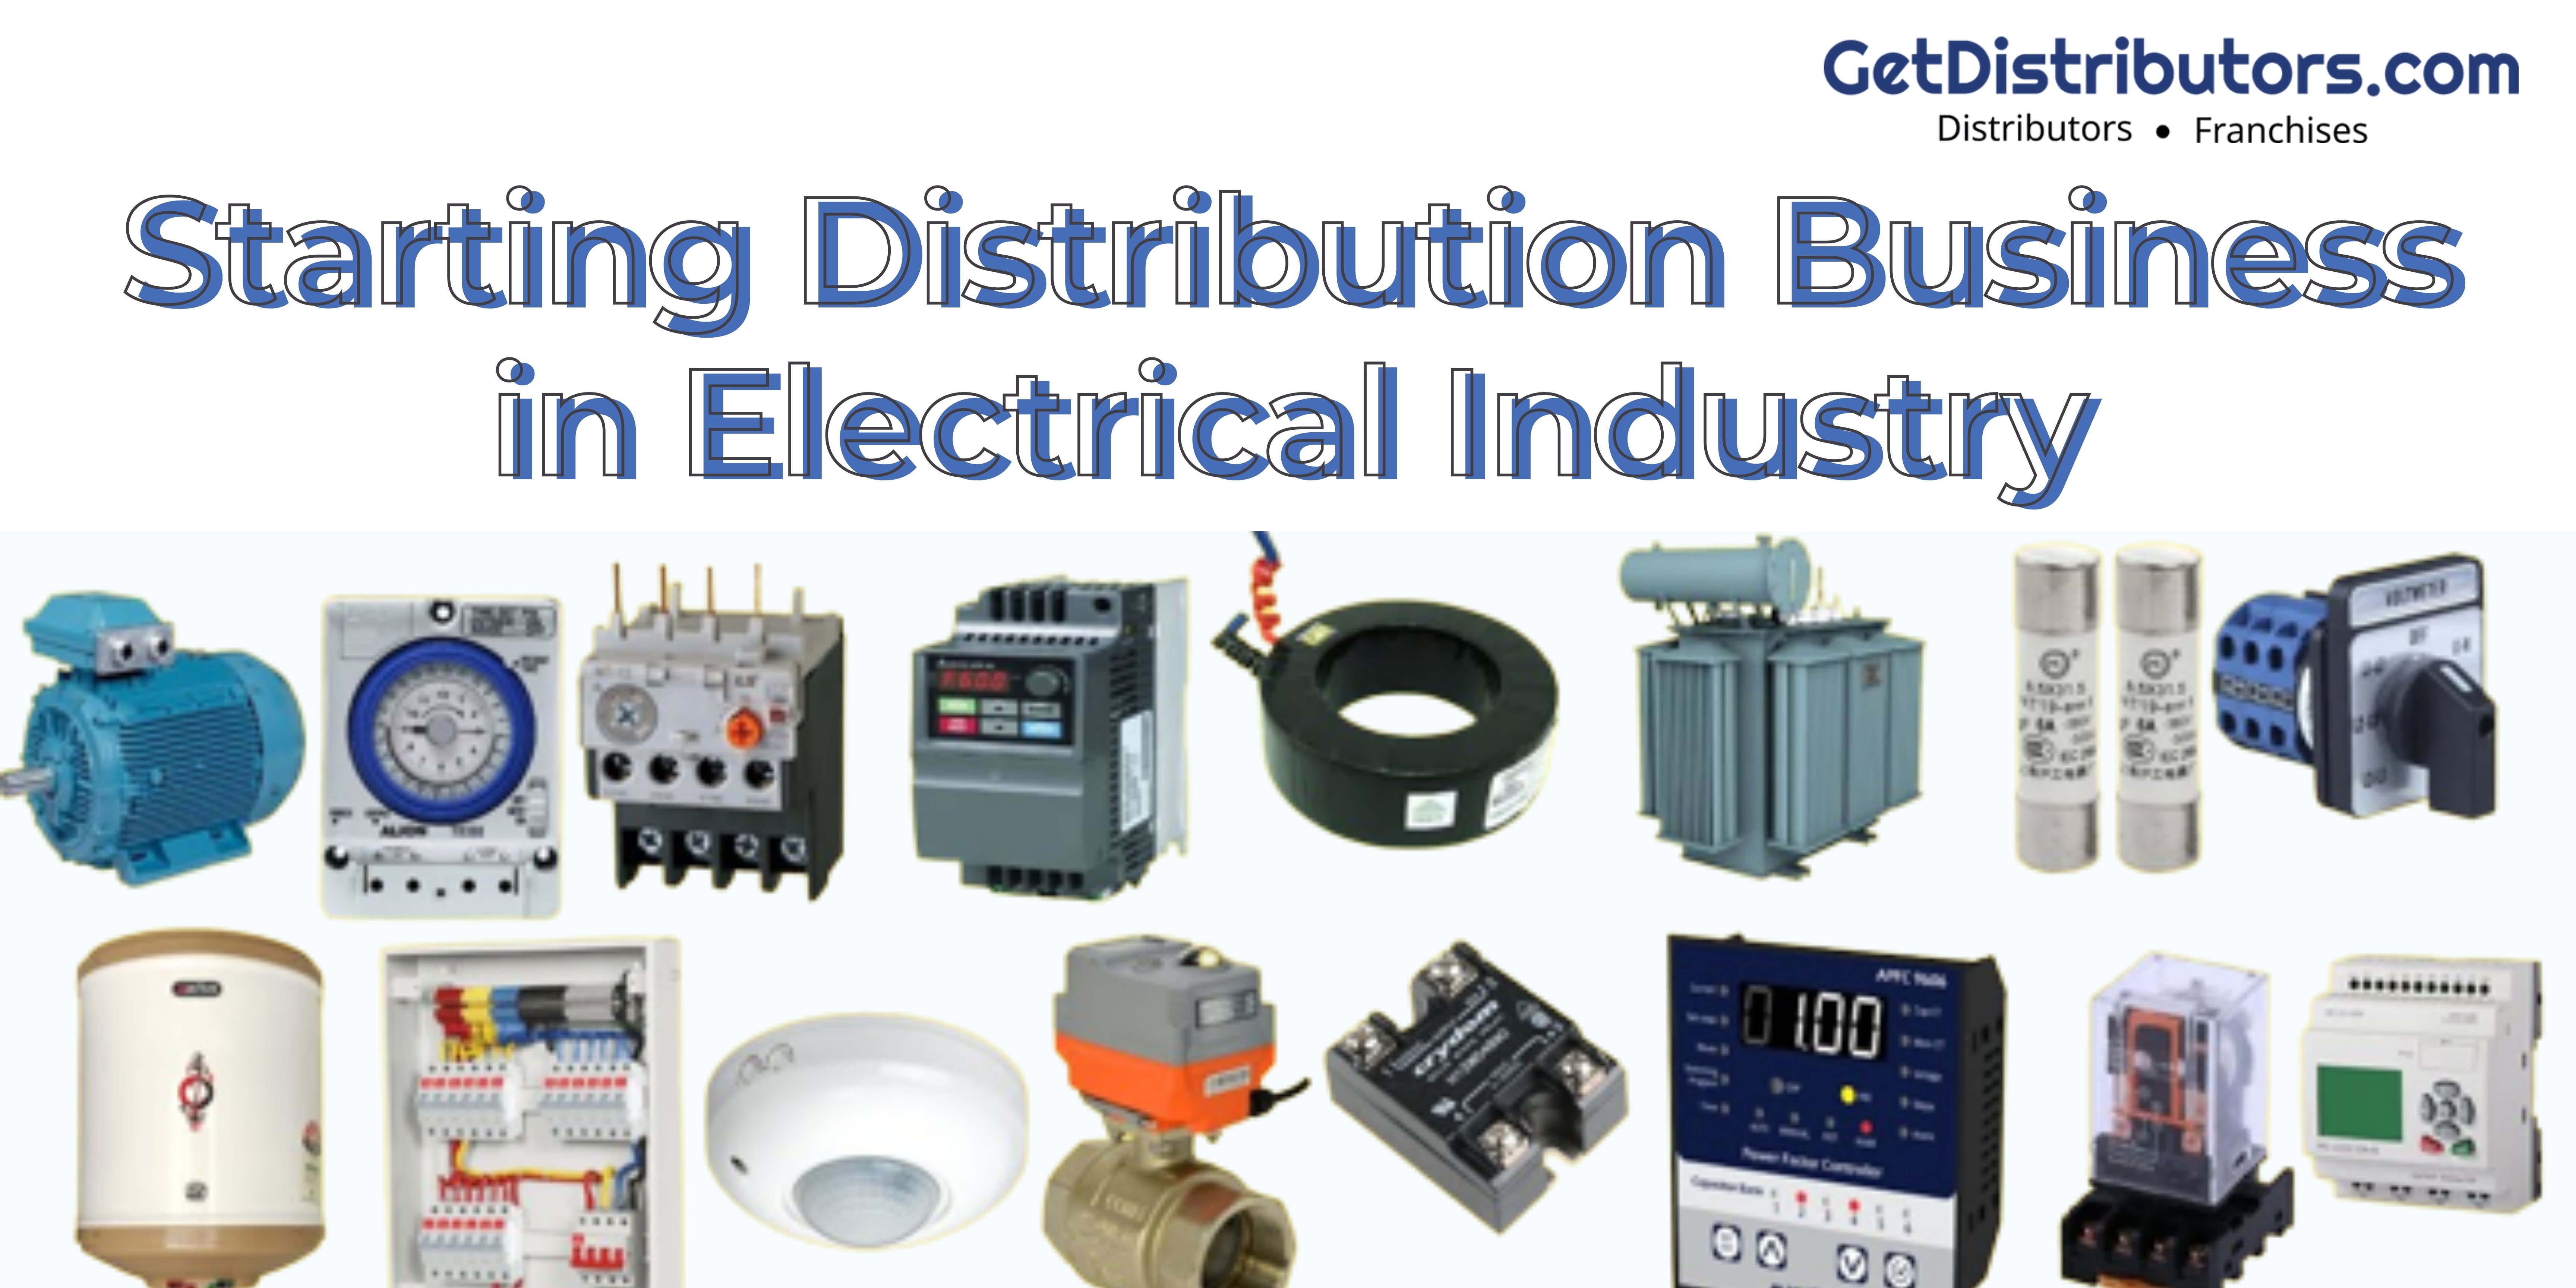 Starting Distribution Business in Electrical Industry